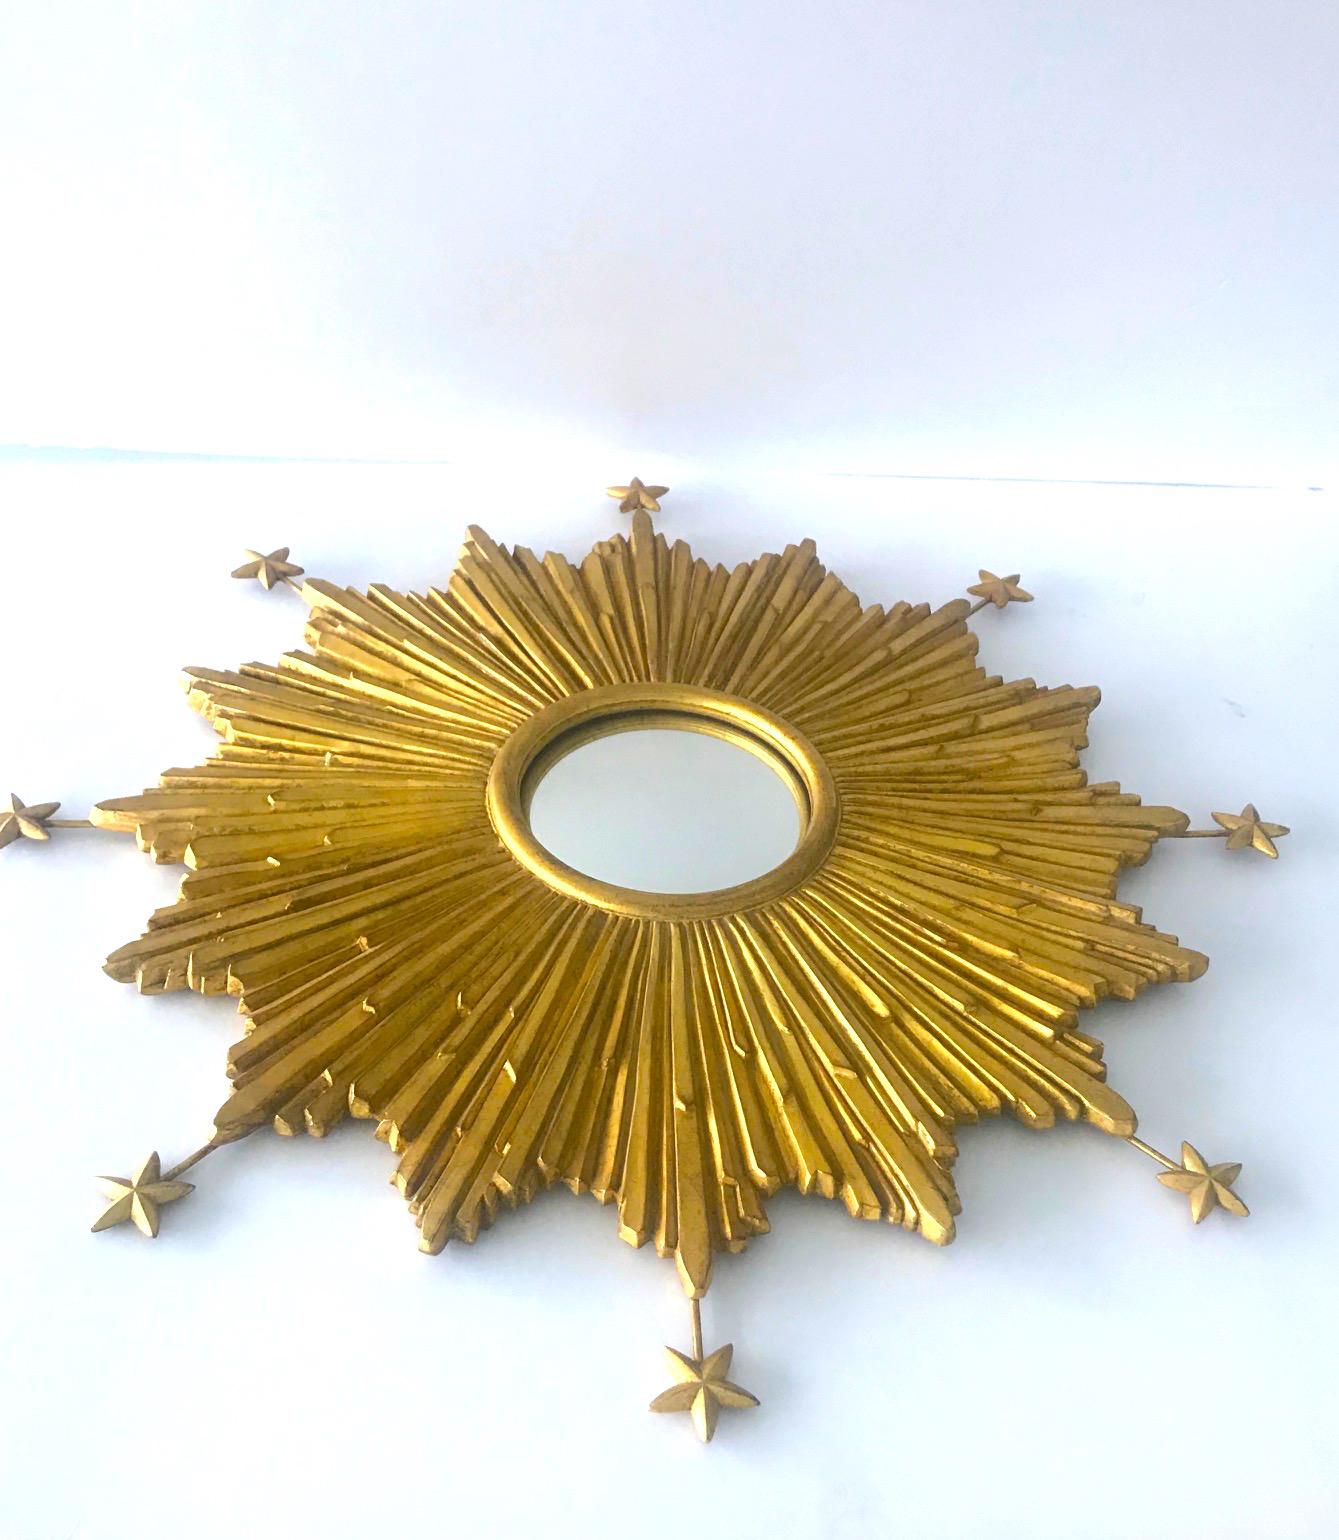 Baroque Exceptional Starburst Mirror Hand Carved with Antique Gold Leaf Finish